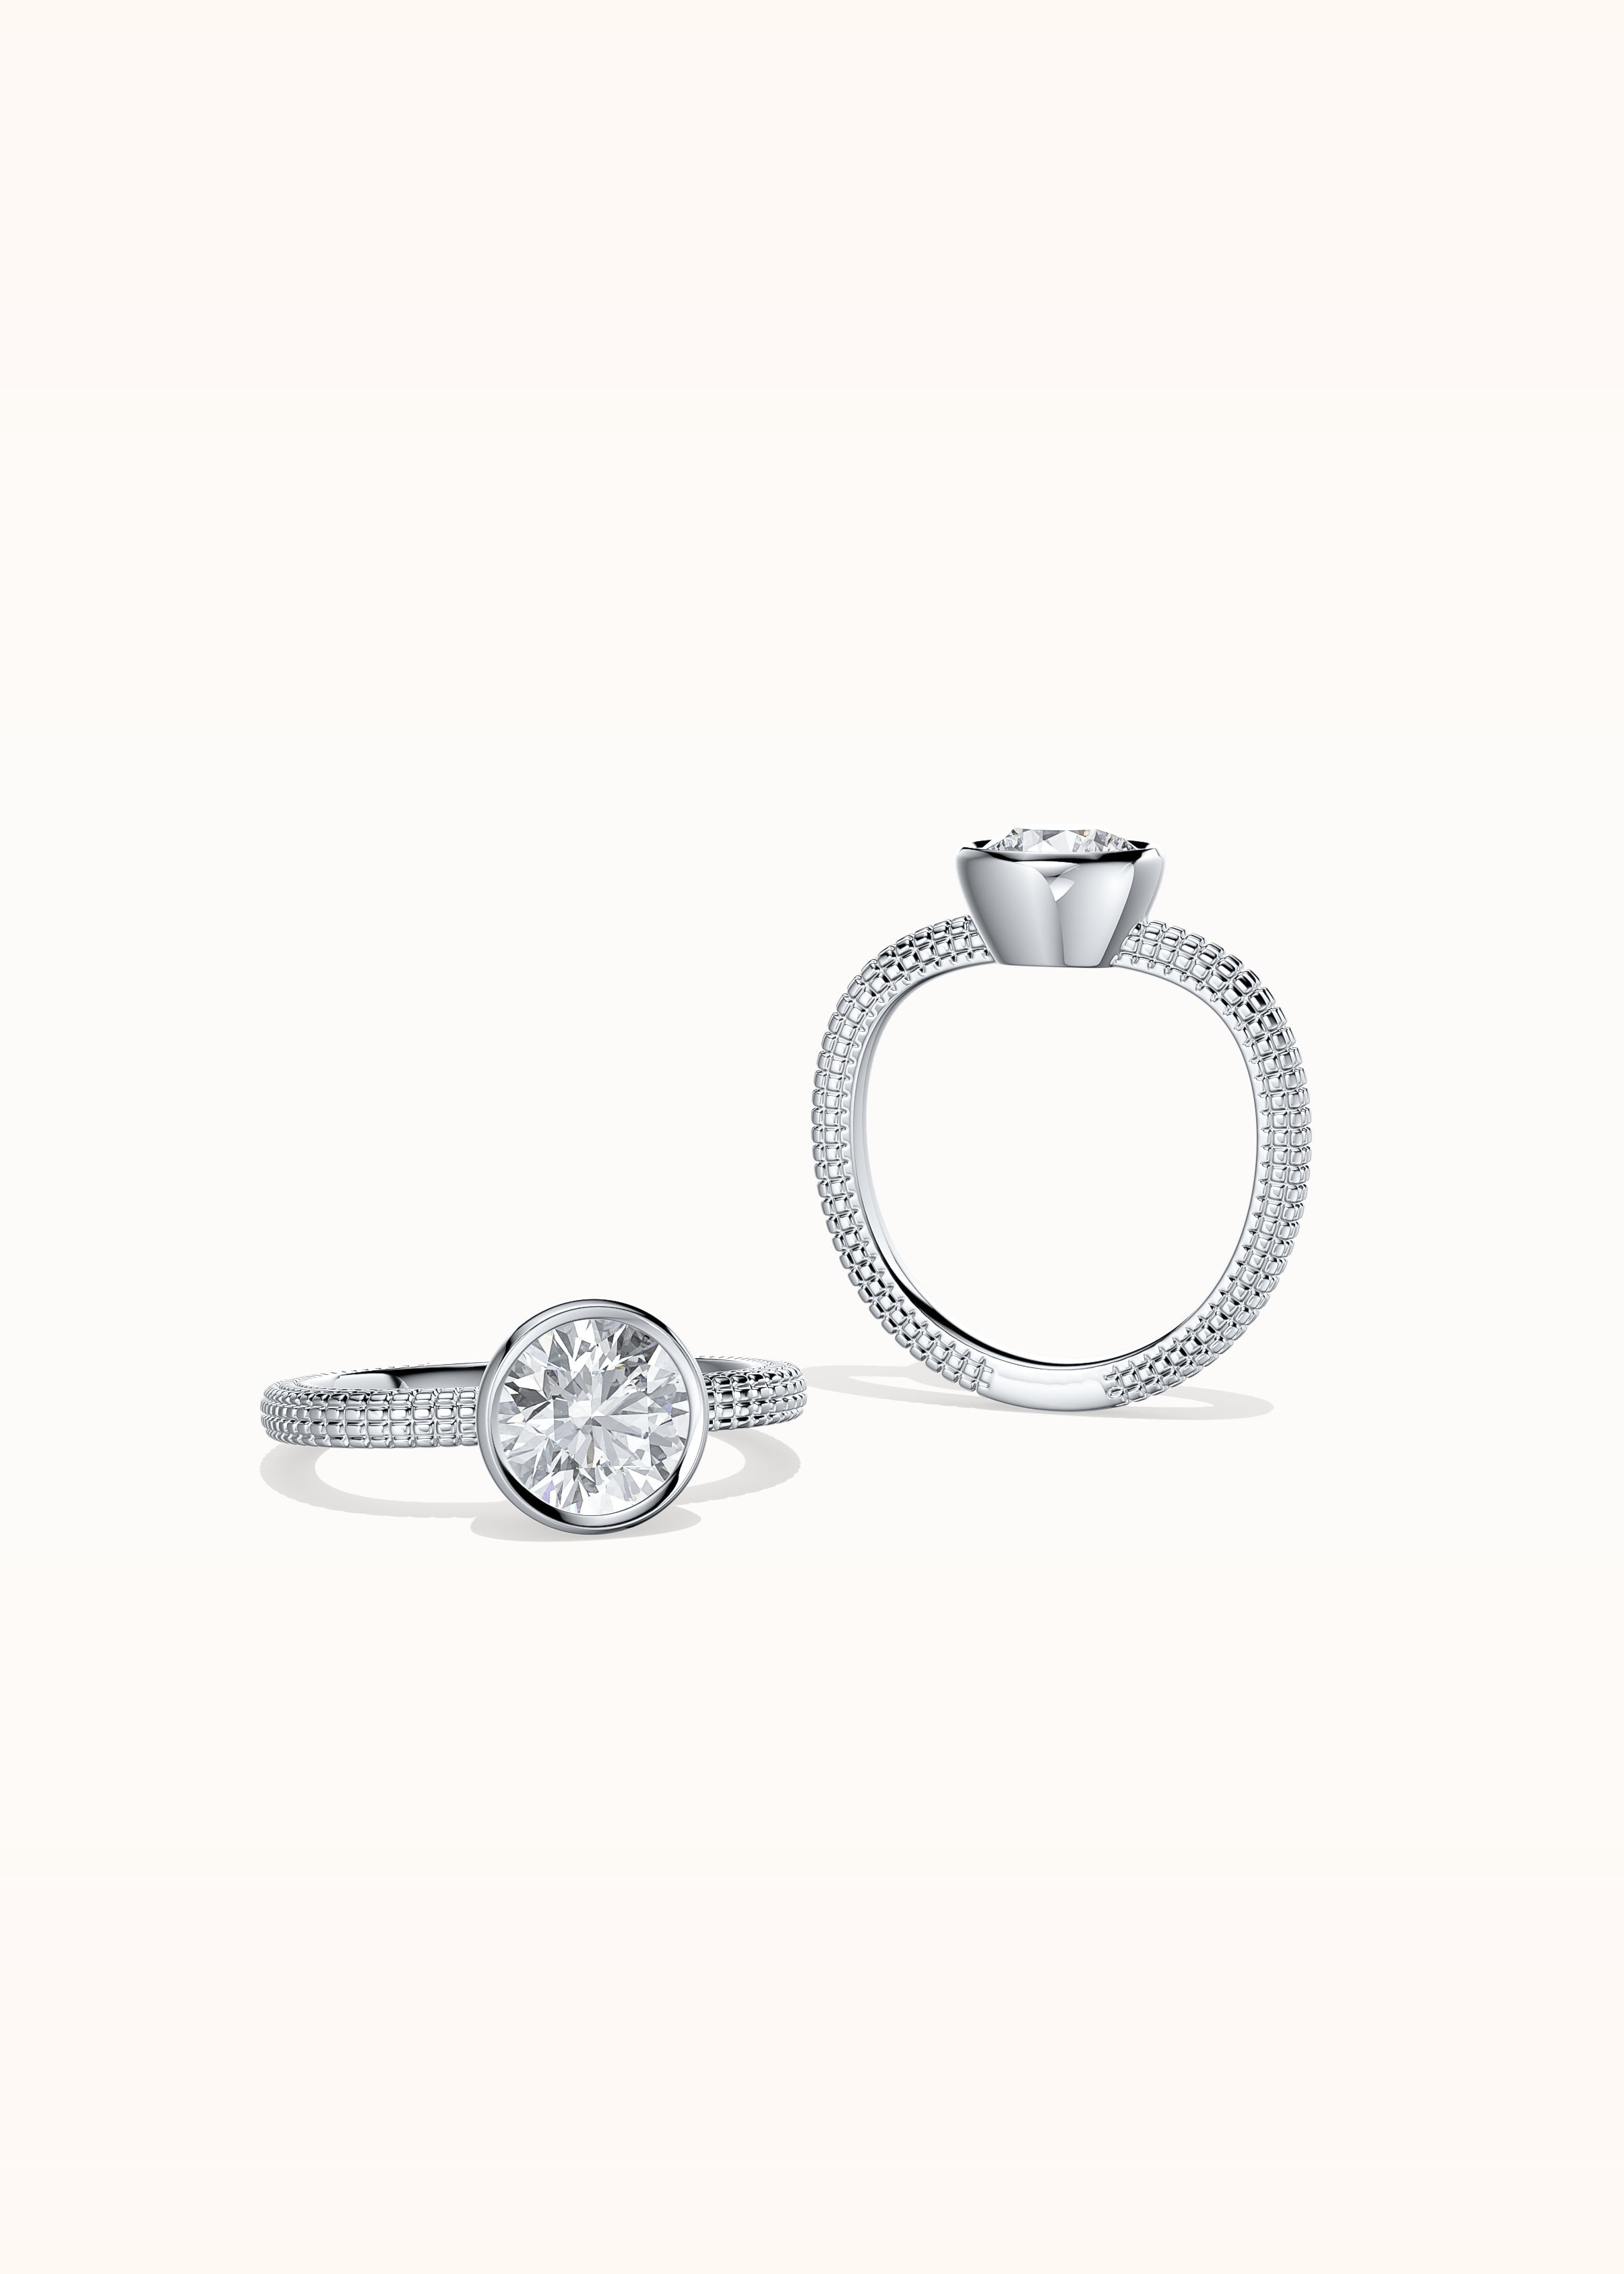 Ethereal Solitaire Round Diamond Ring